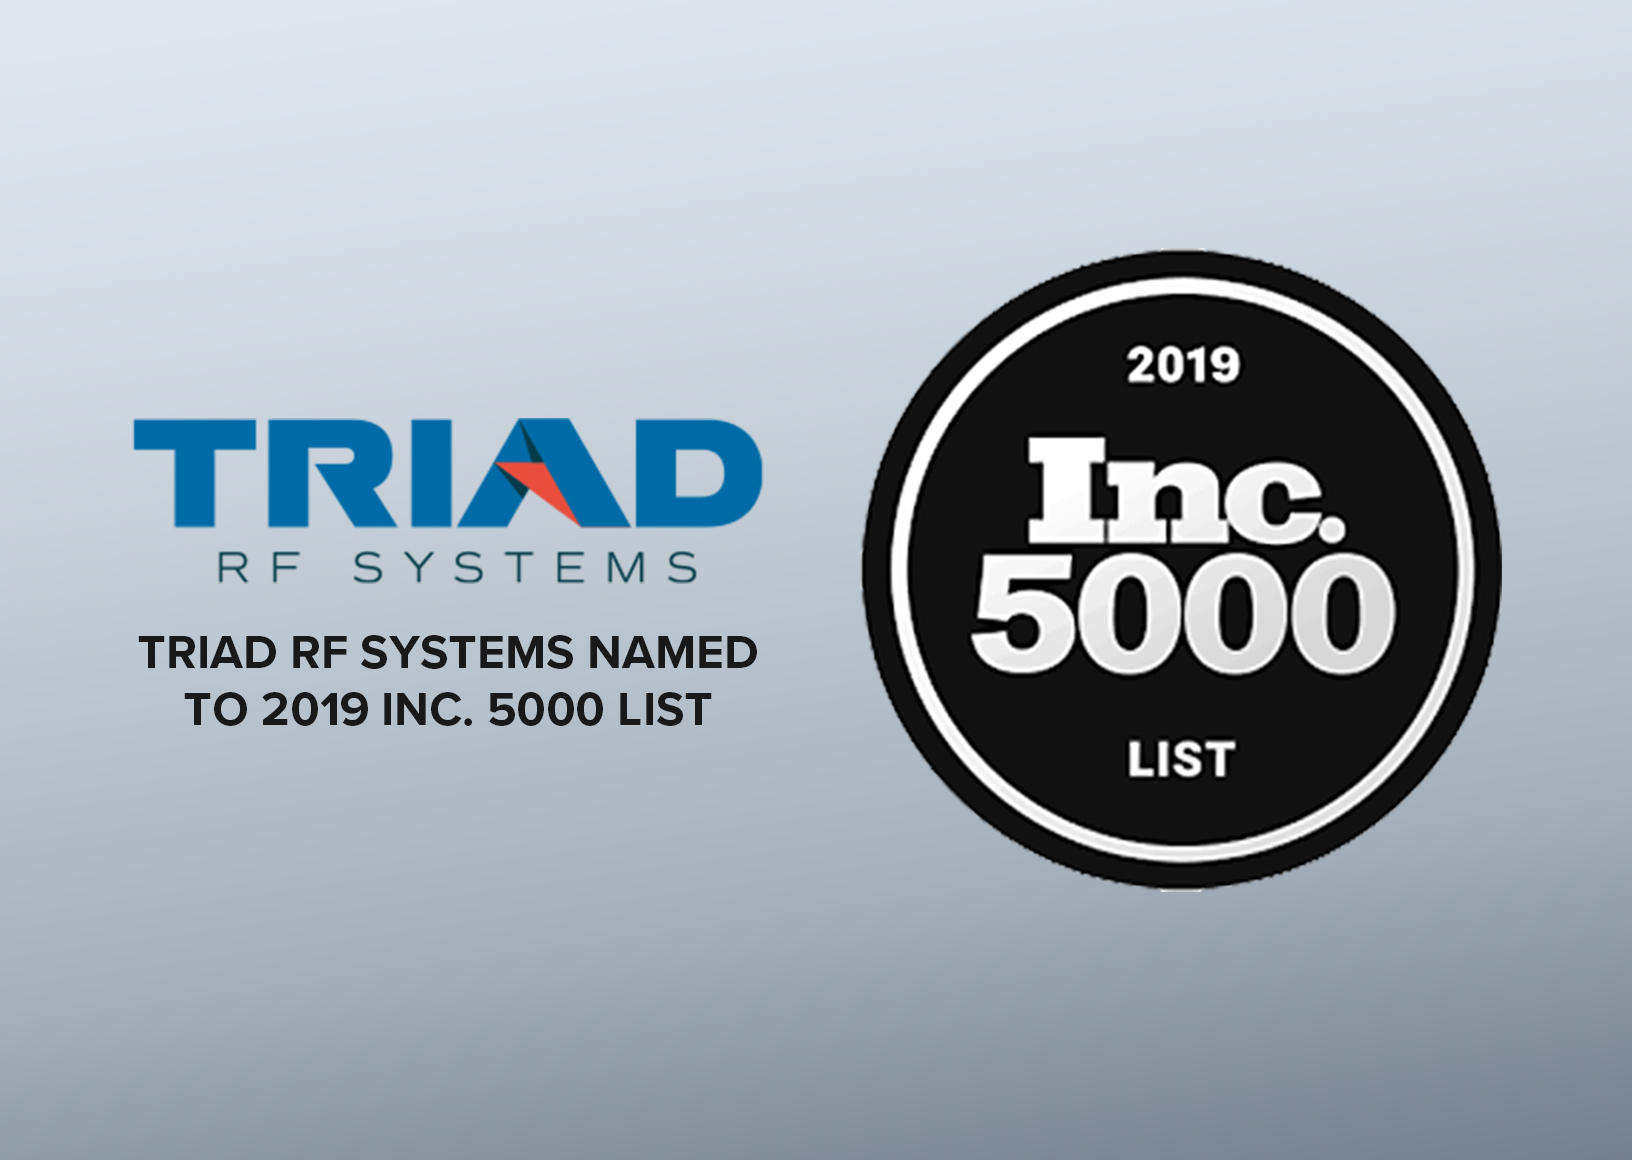 Triad RF Systems Named to 2019 Inc. 5000 List of Fastest Growing Companies